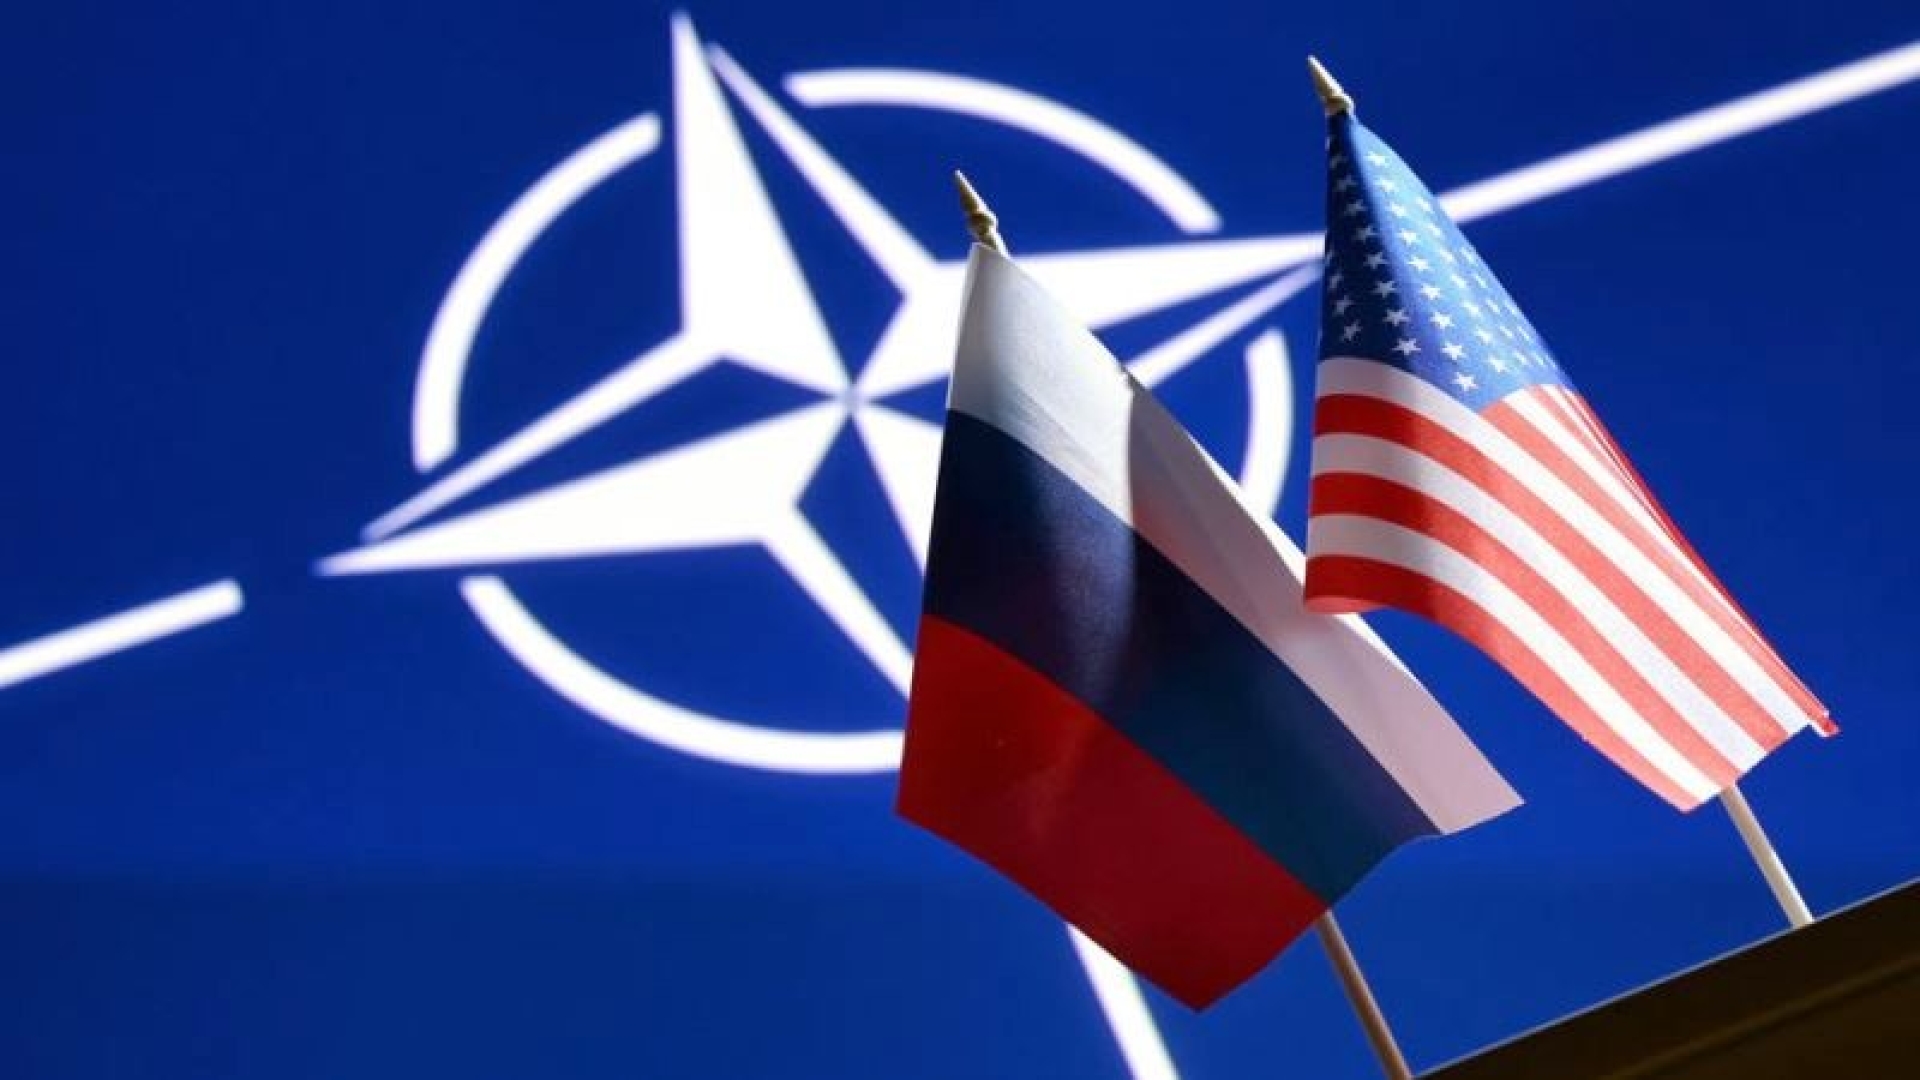 Russia and NATO: Half-ton time has passed